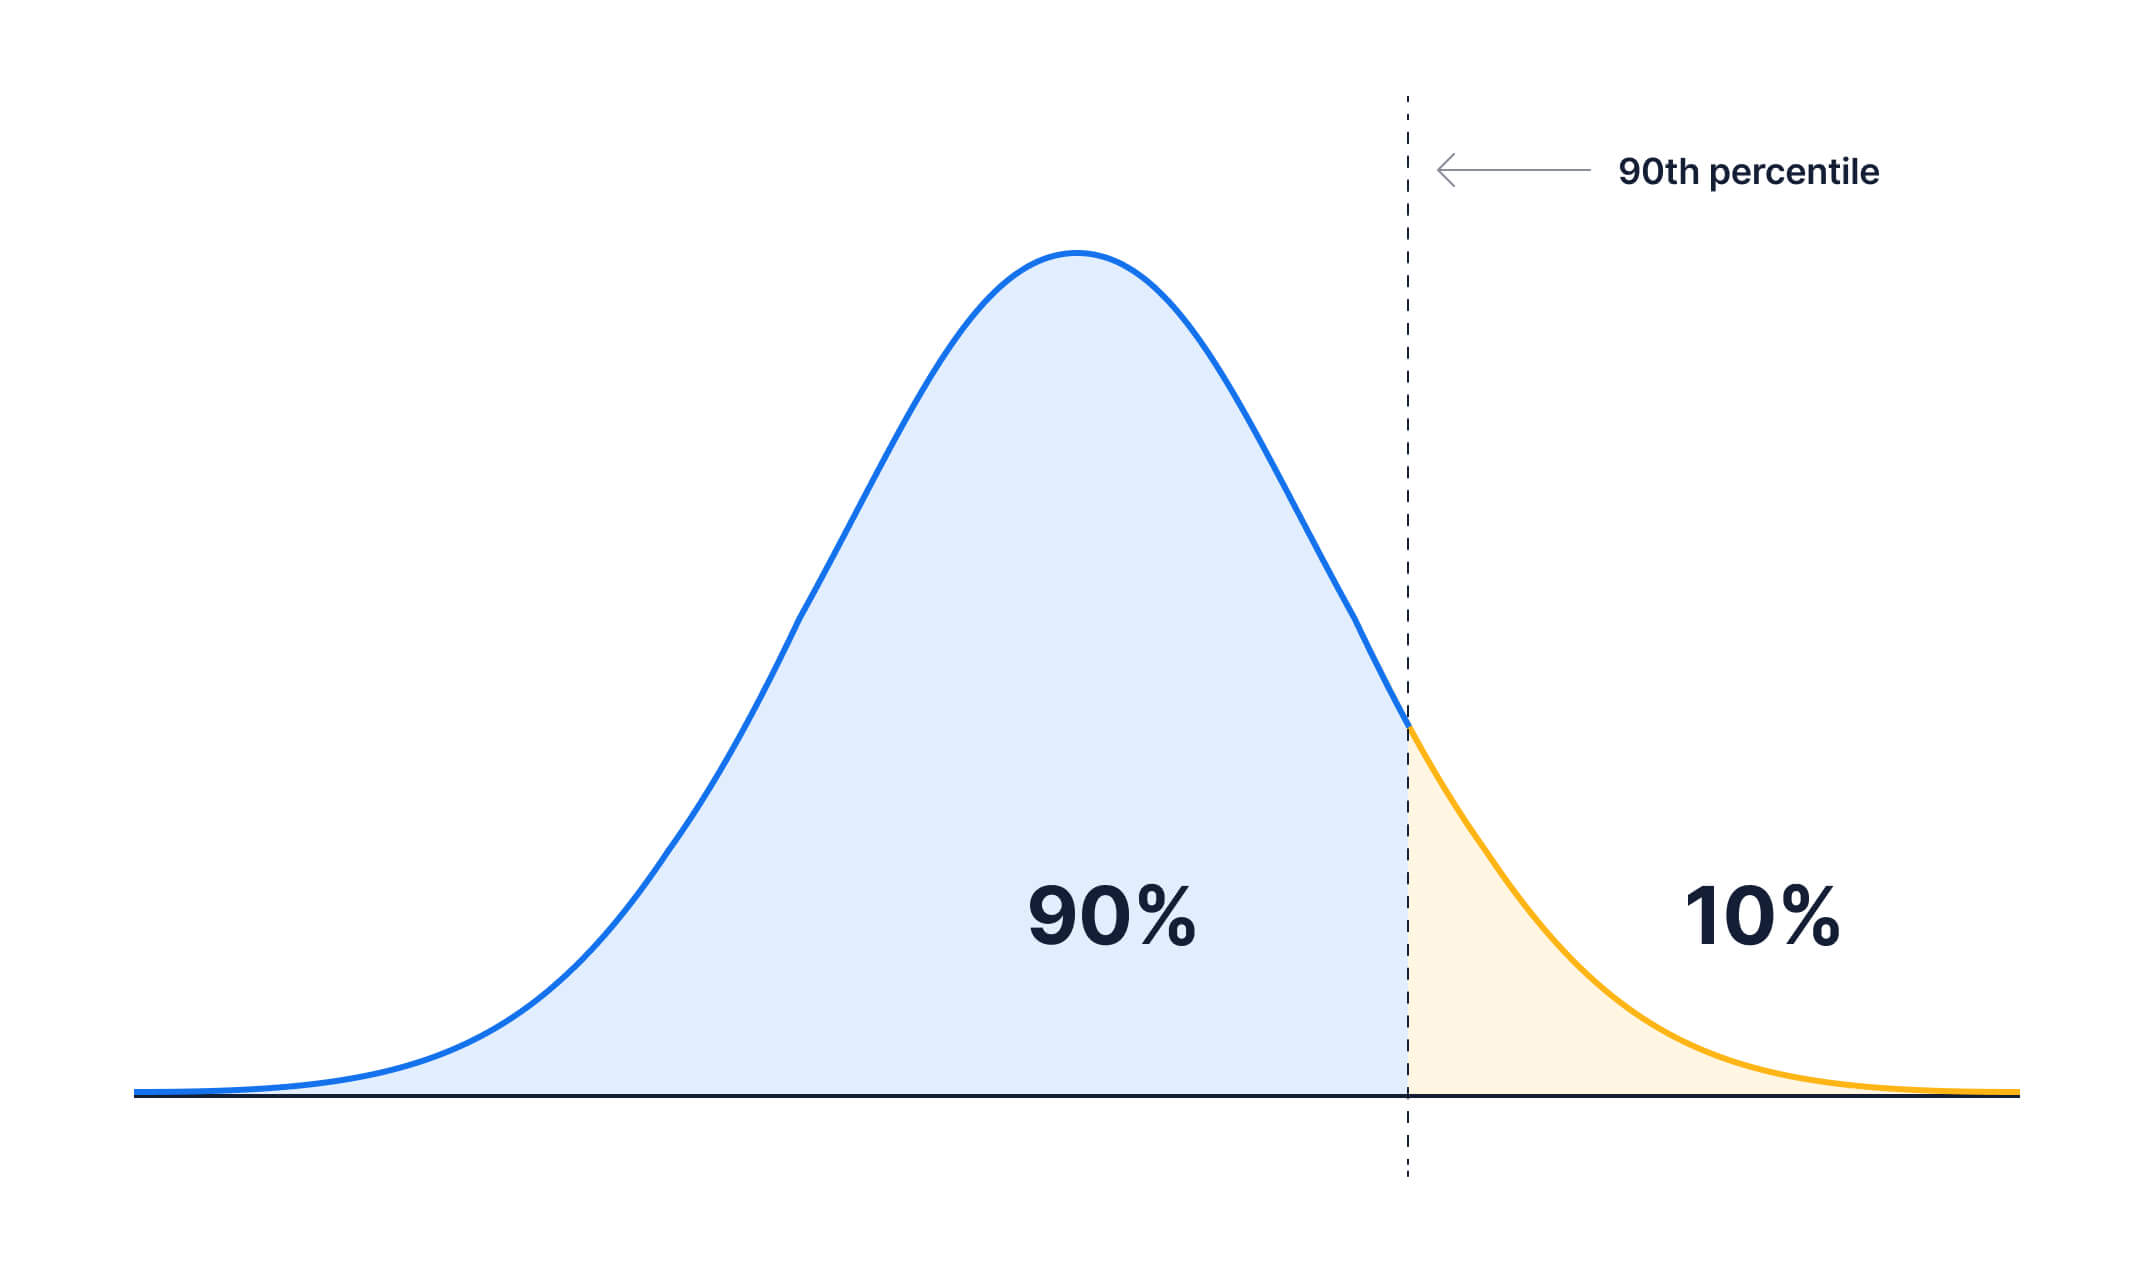 The same as the last graph except the line has shifted to the right and is now labeled 90th percentile, 90% of the area under the curve to the left of the line is shaded one color, the 10% to the right of the line is shaded a different color.